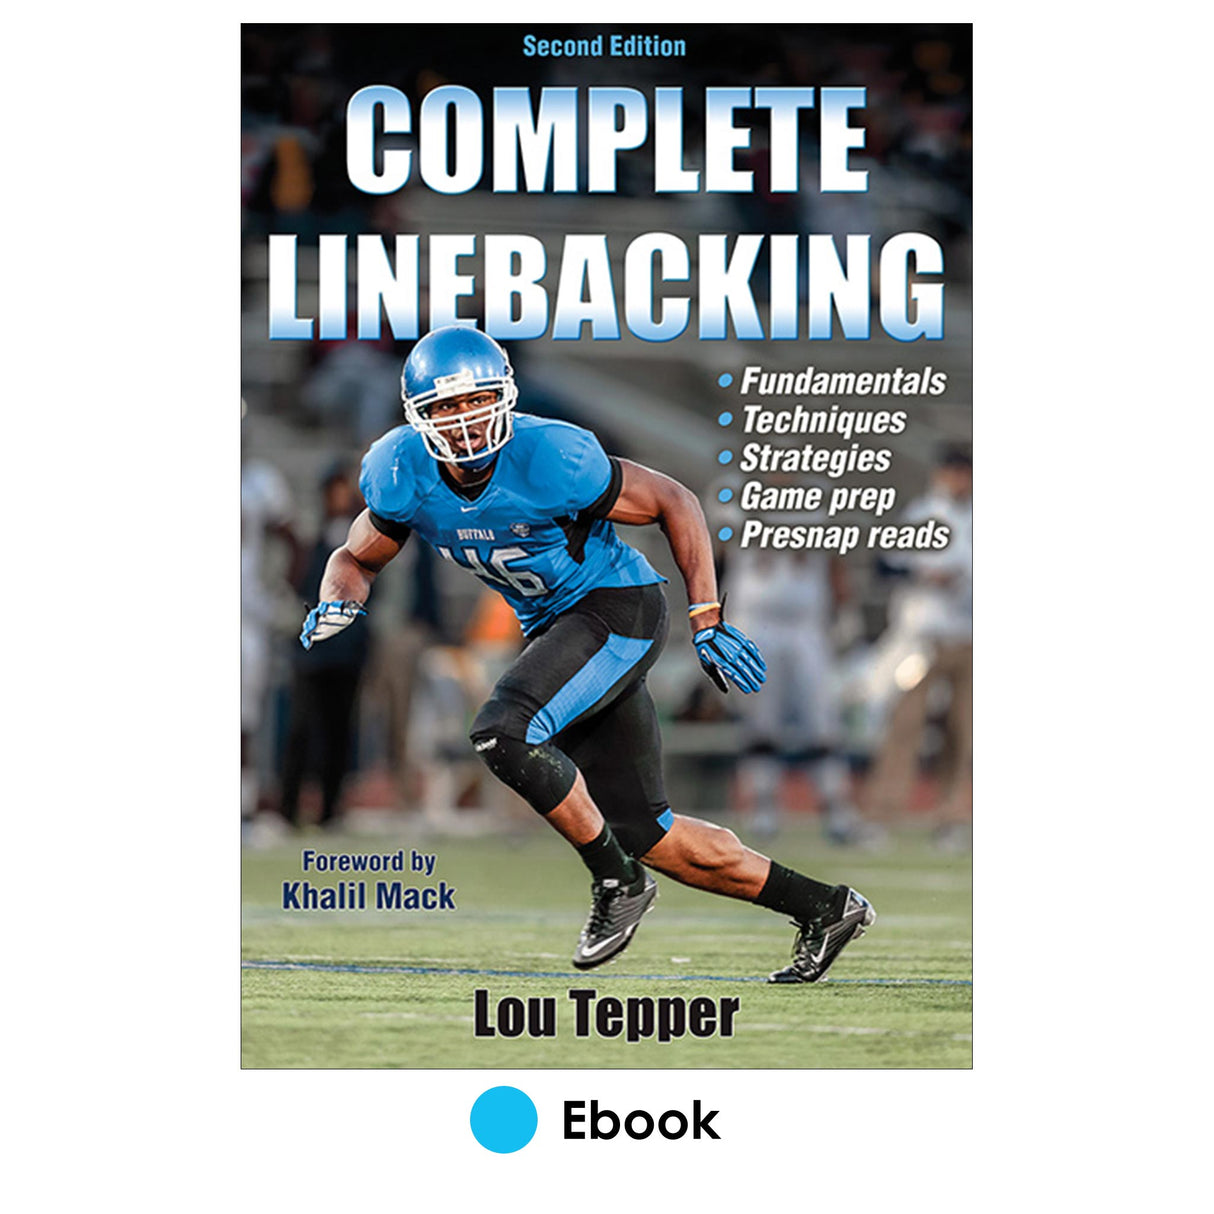 Complete Linebacking 2nd Edition PDF